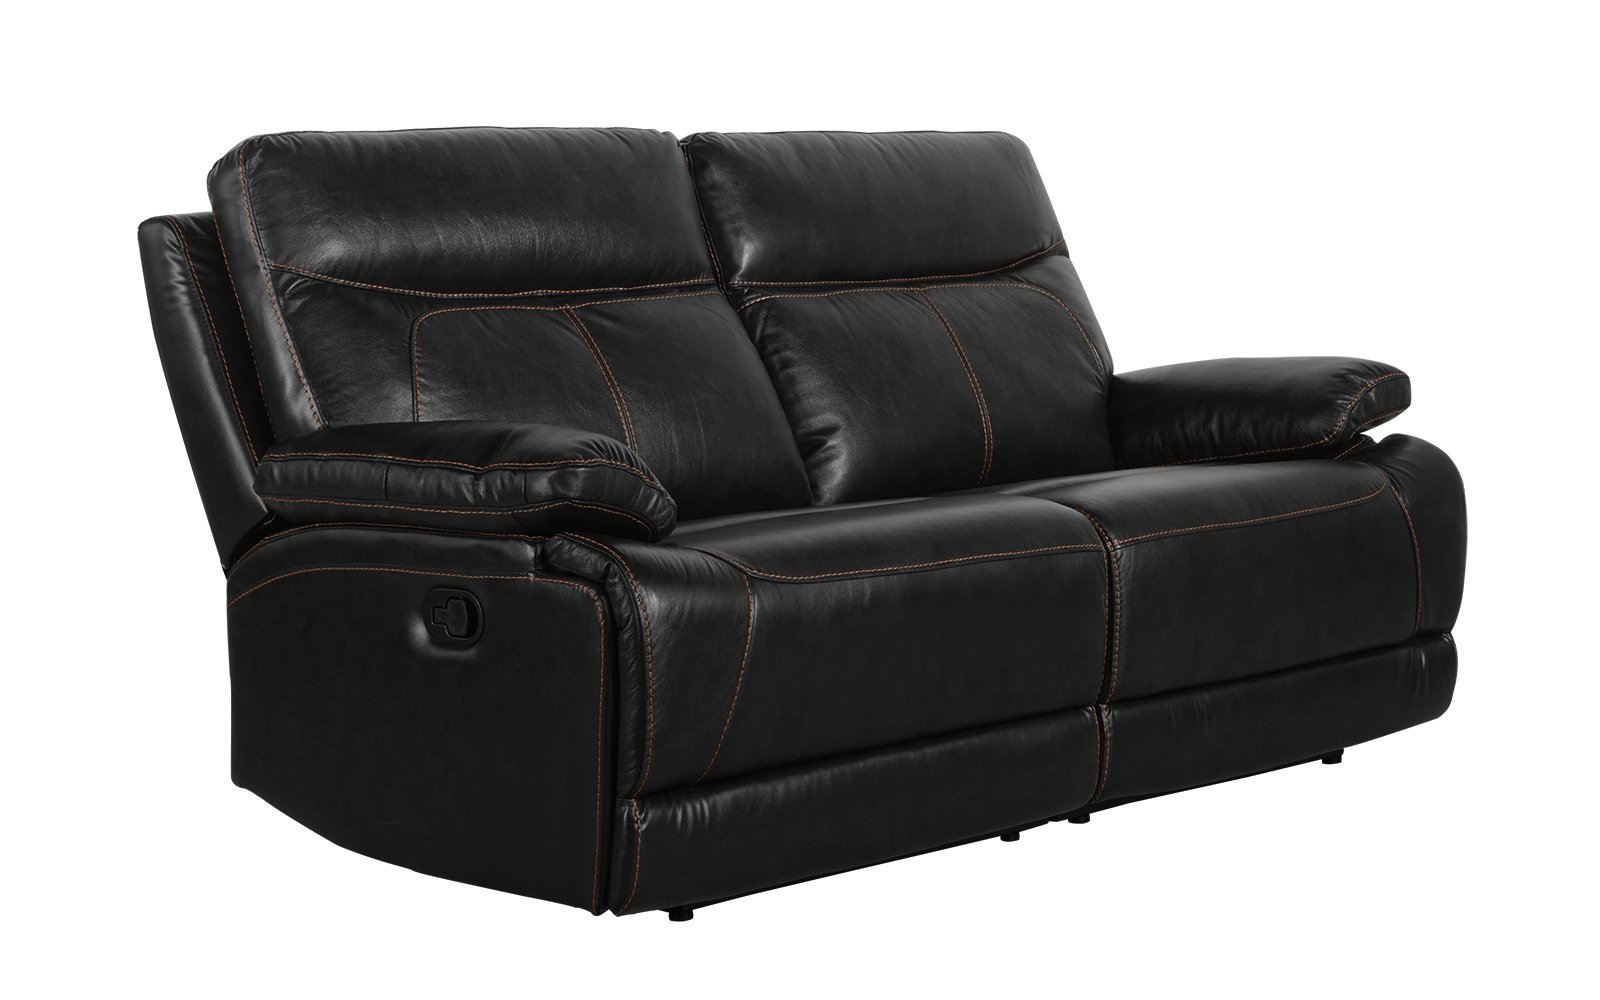 Classic Leather Match Upholstered Couch 74.4 inches Recliner Loveseat